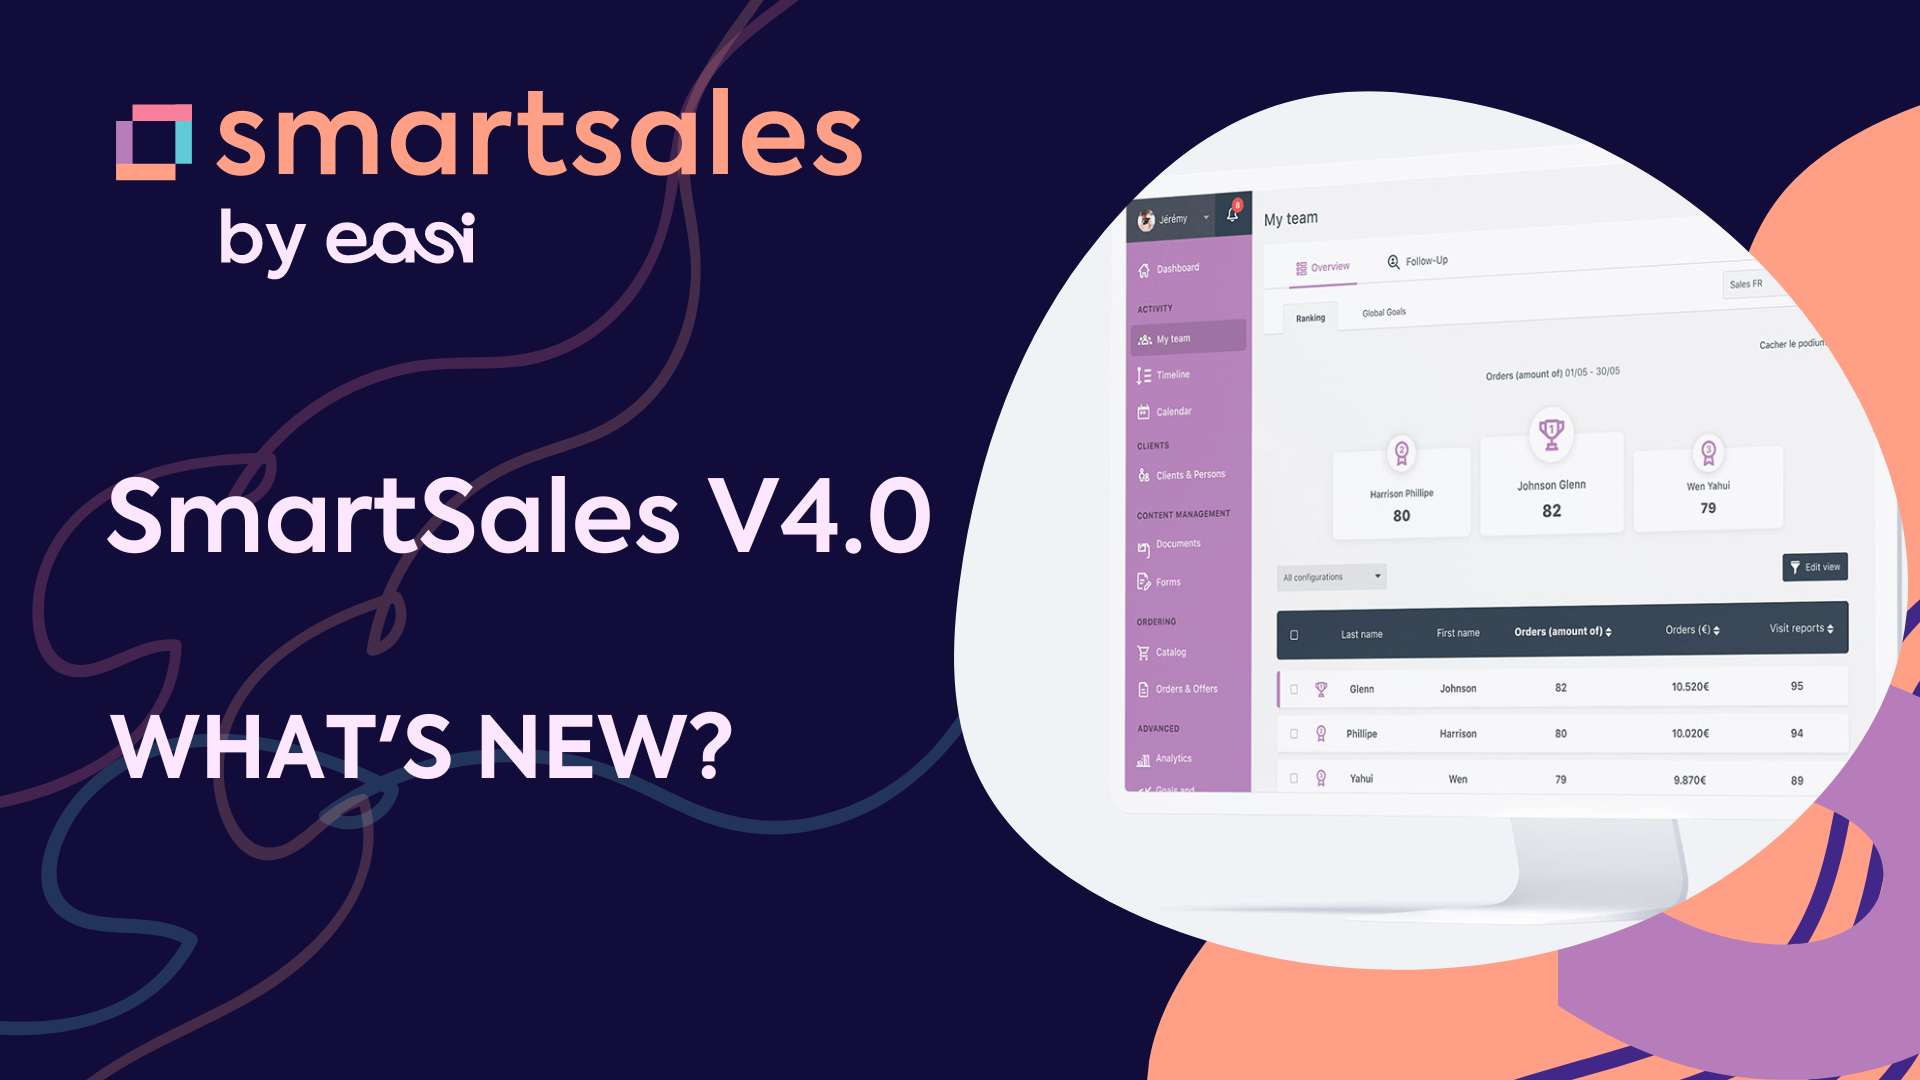 SmartSales V4.0 What's new?